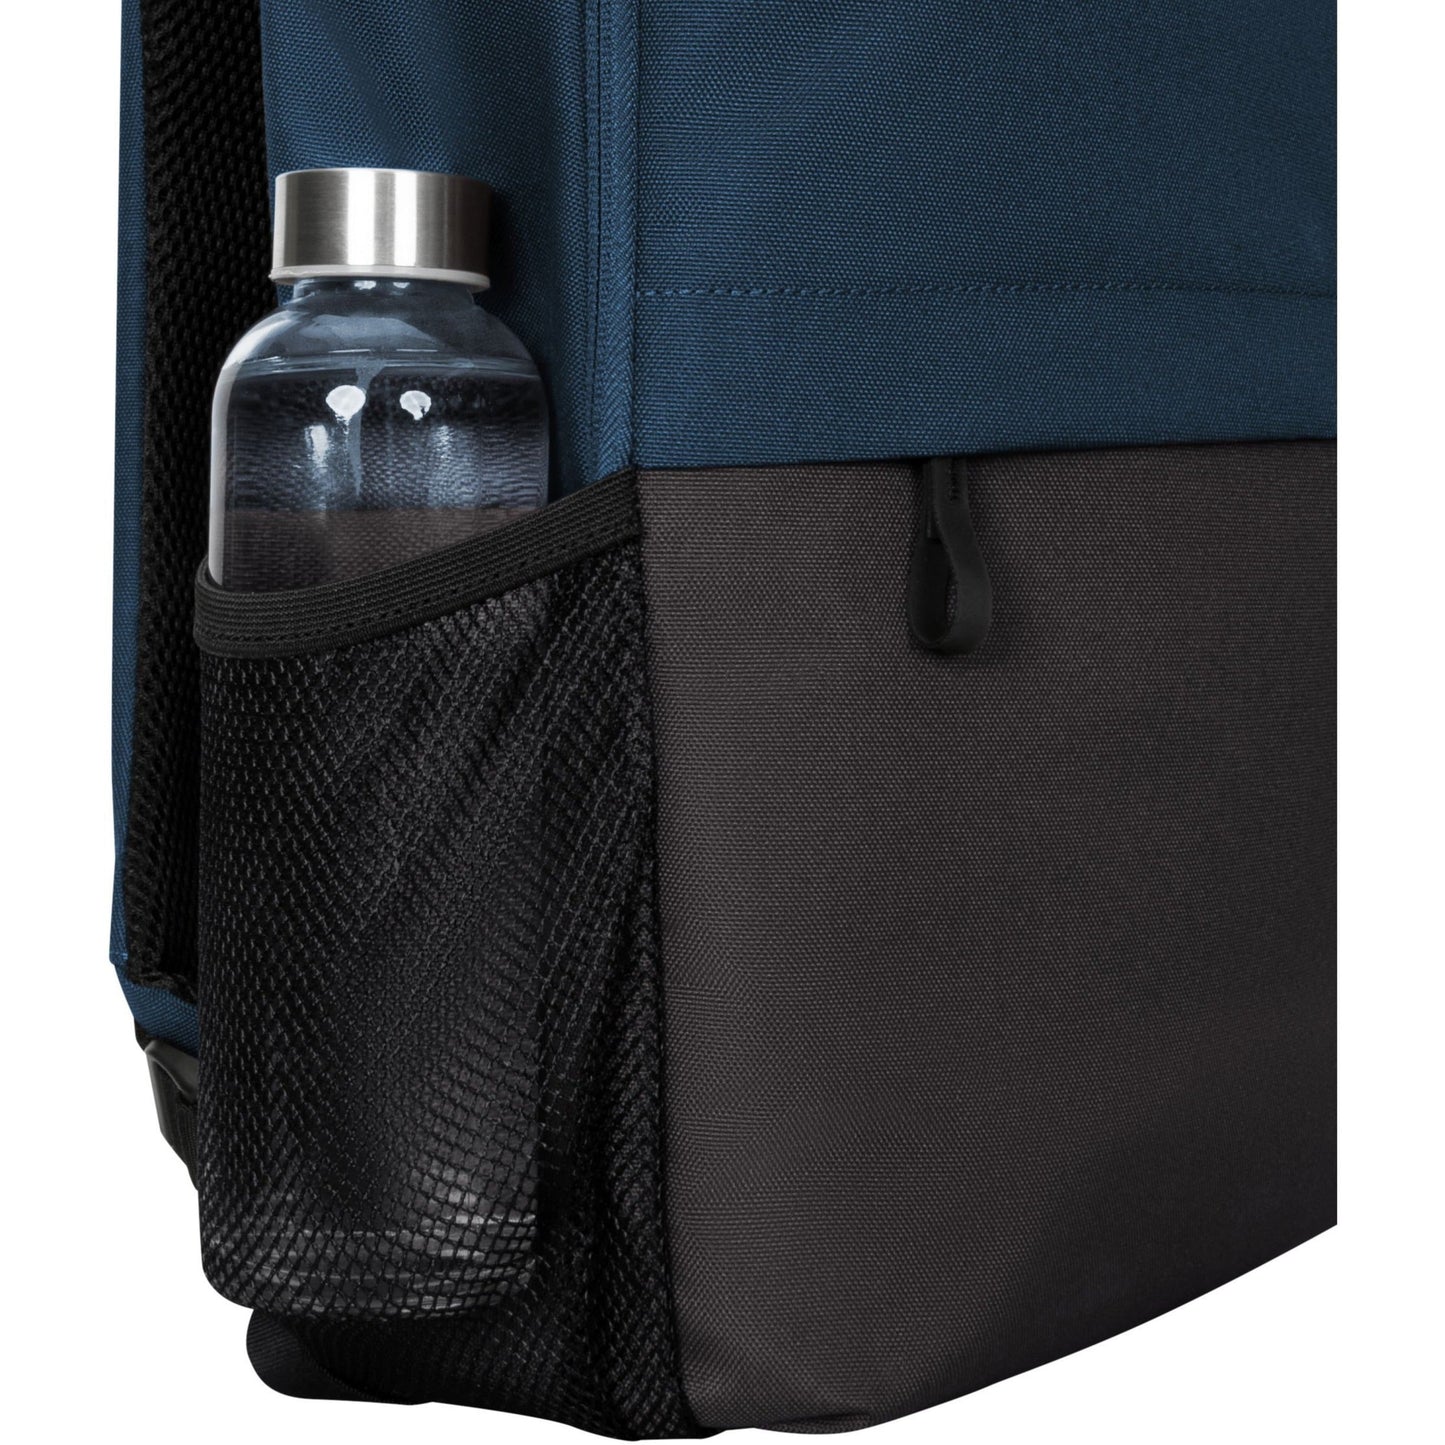 Targus Sagano EcoSmart TBB63602GL Carrying Case (Backpack) for 15.6" Notebook ID Card Water Bottle - Blue